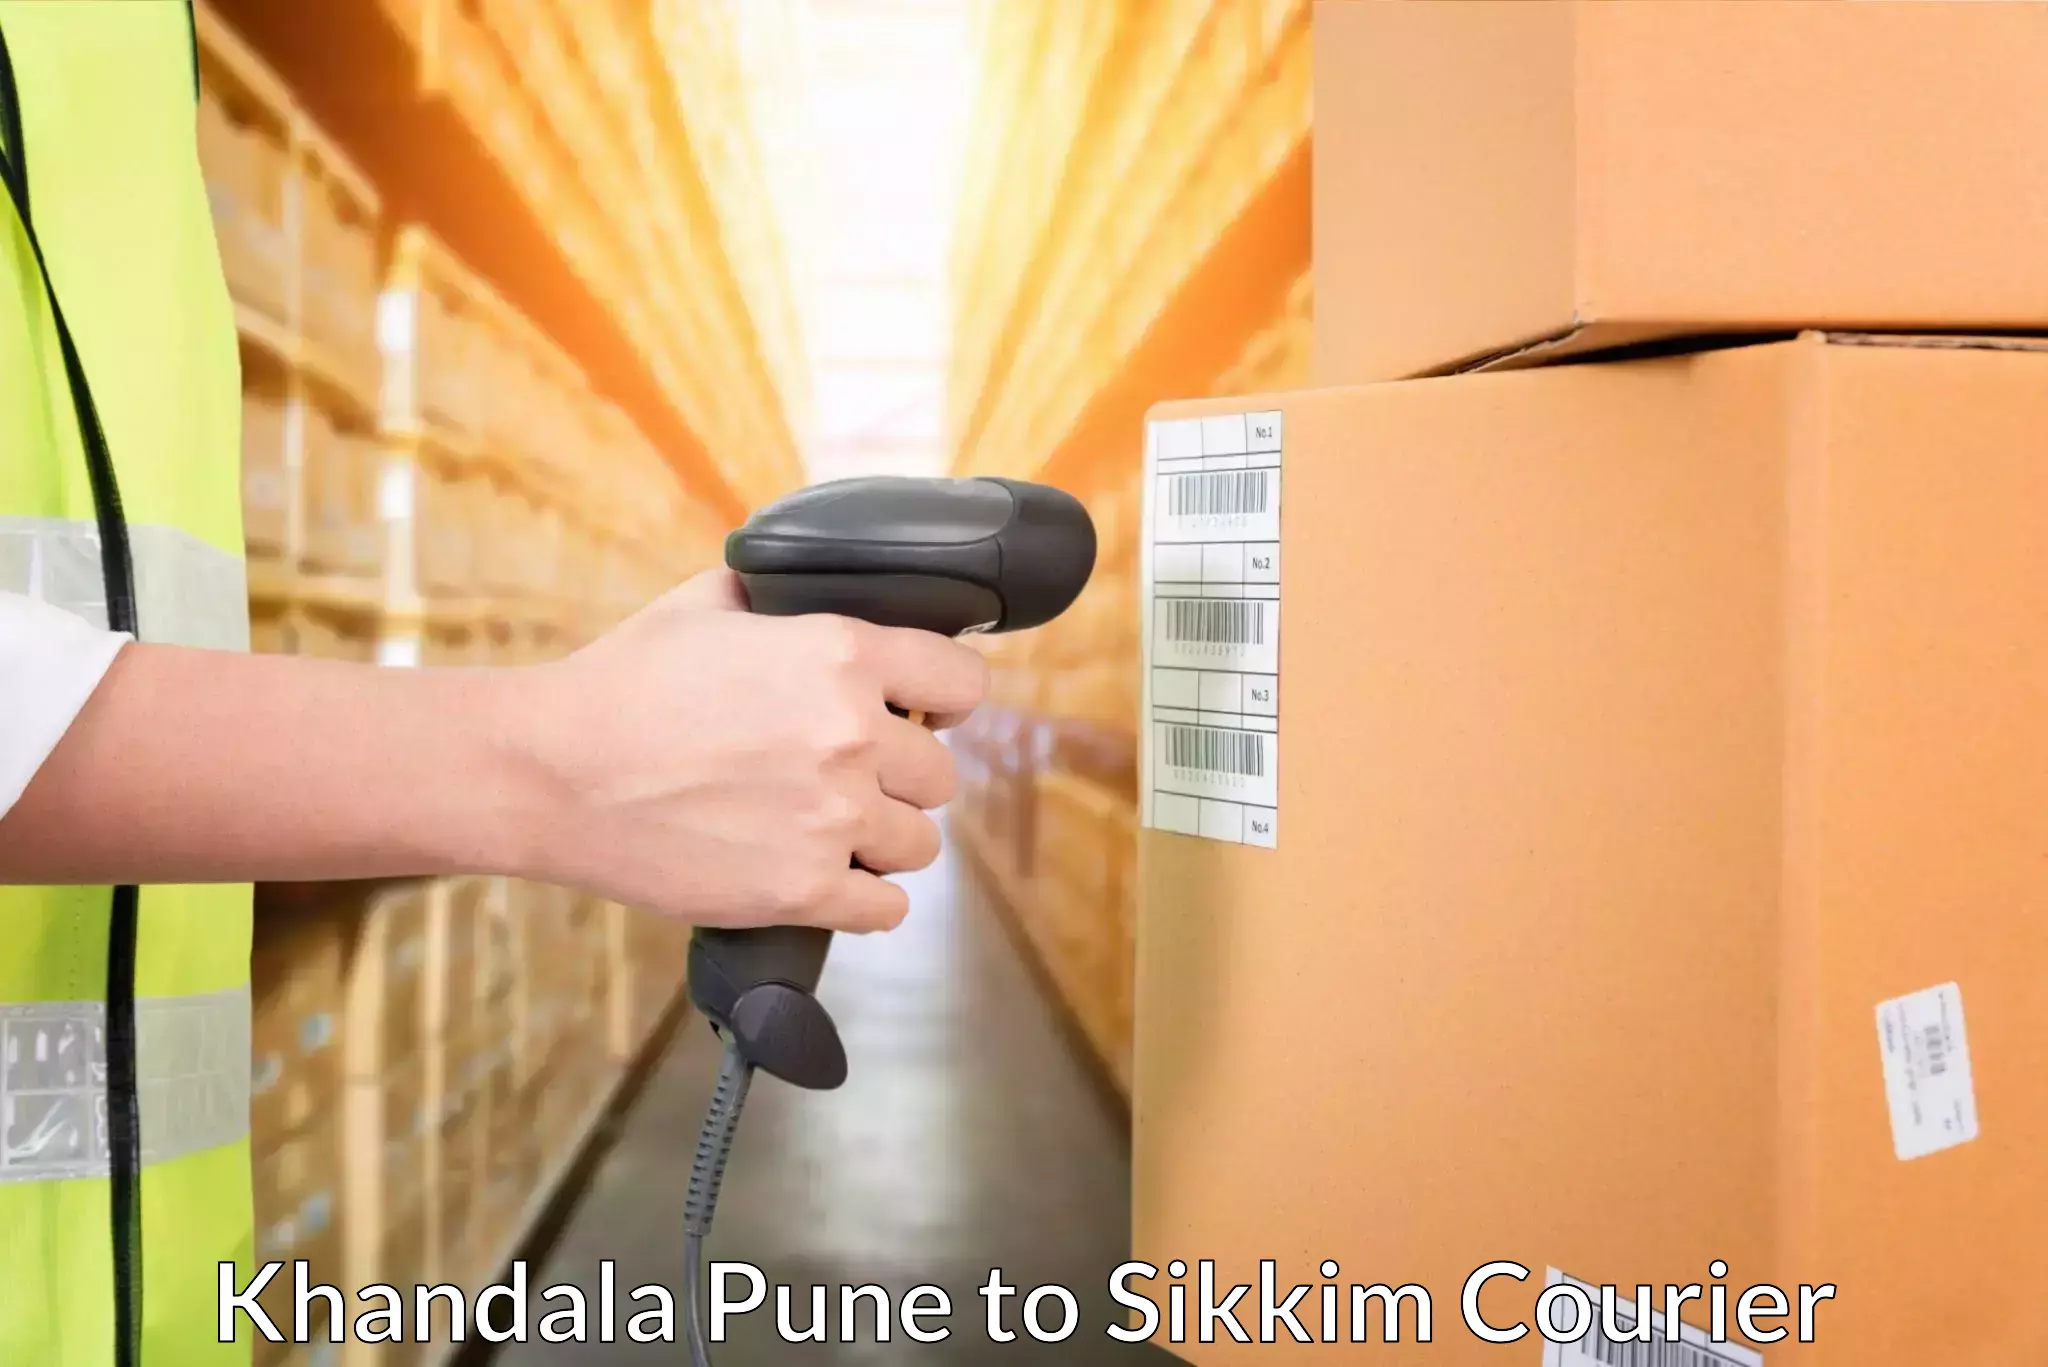 Courier service efficiency Khandala Pune to East Sikkim